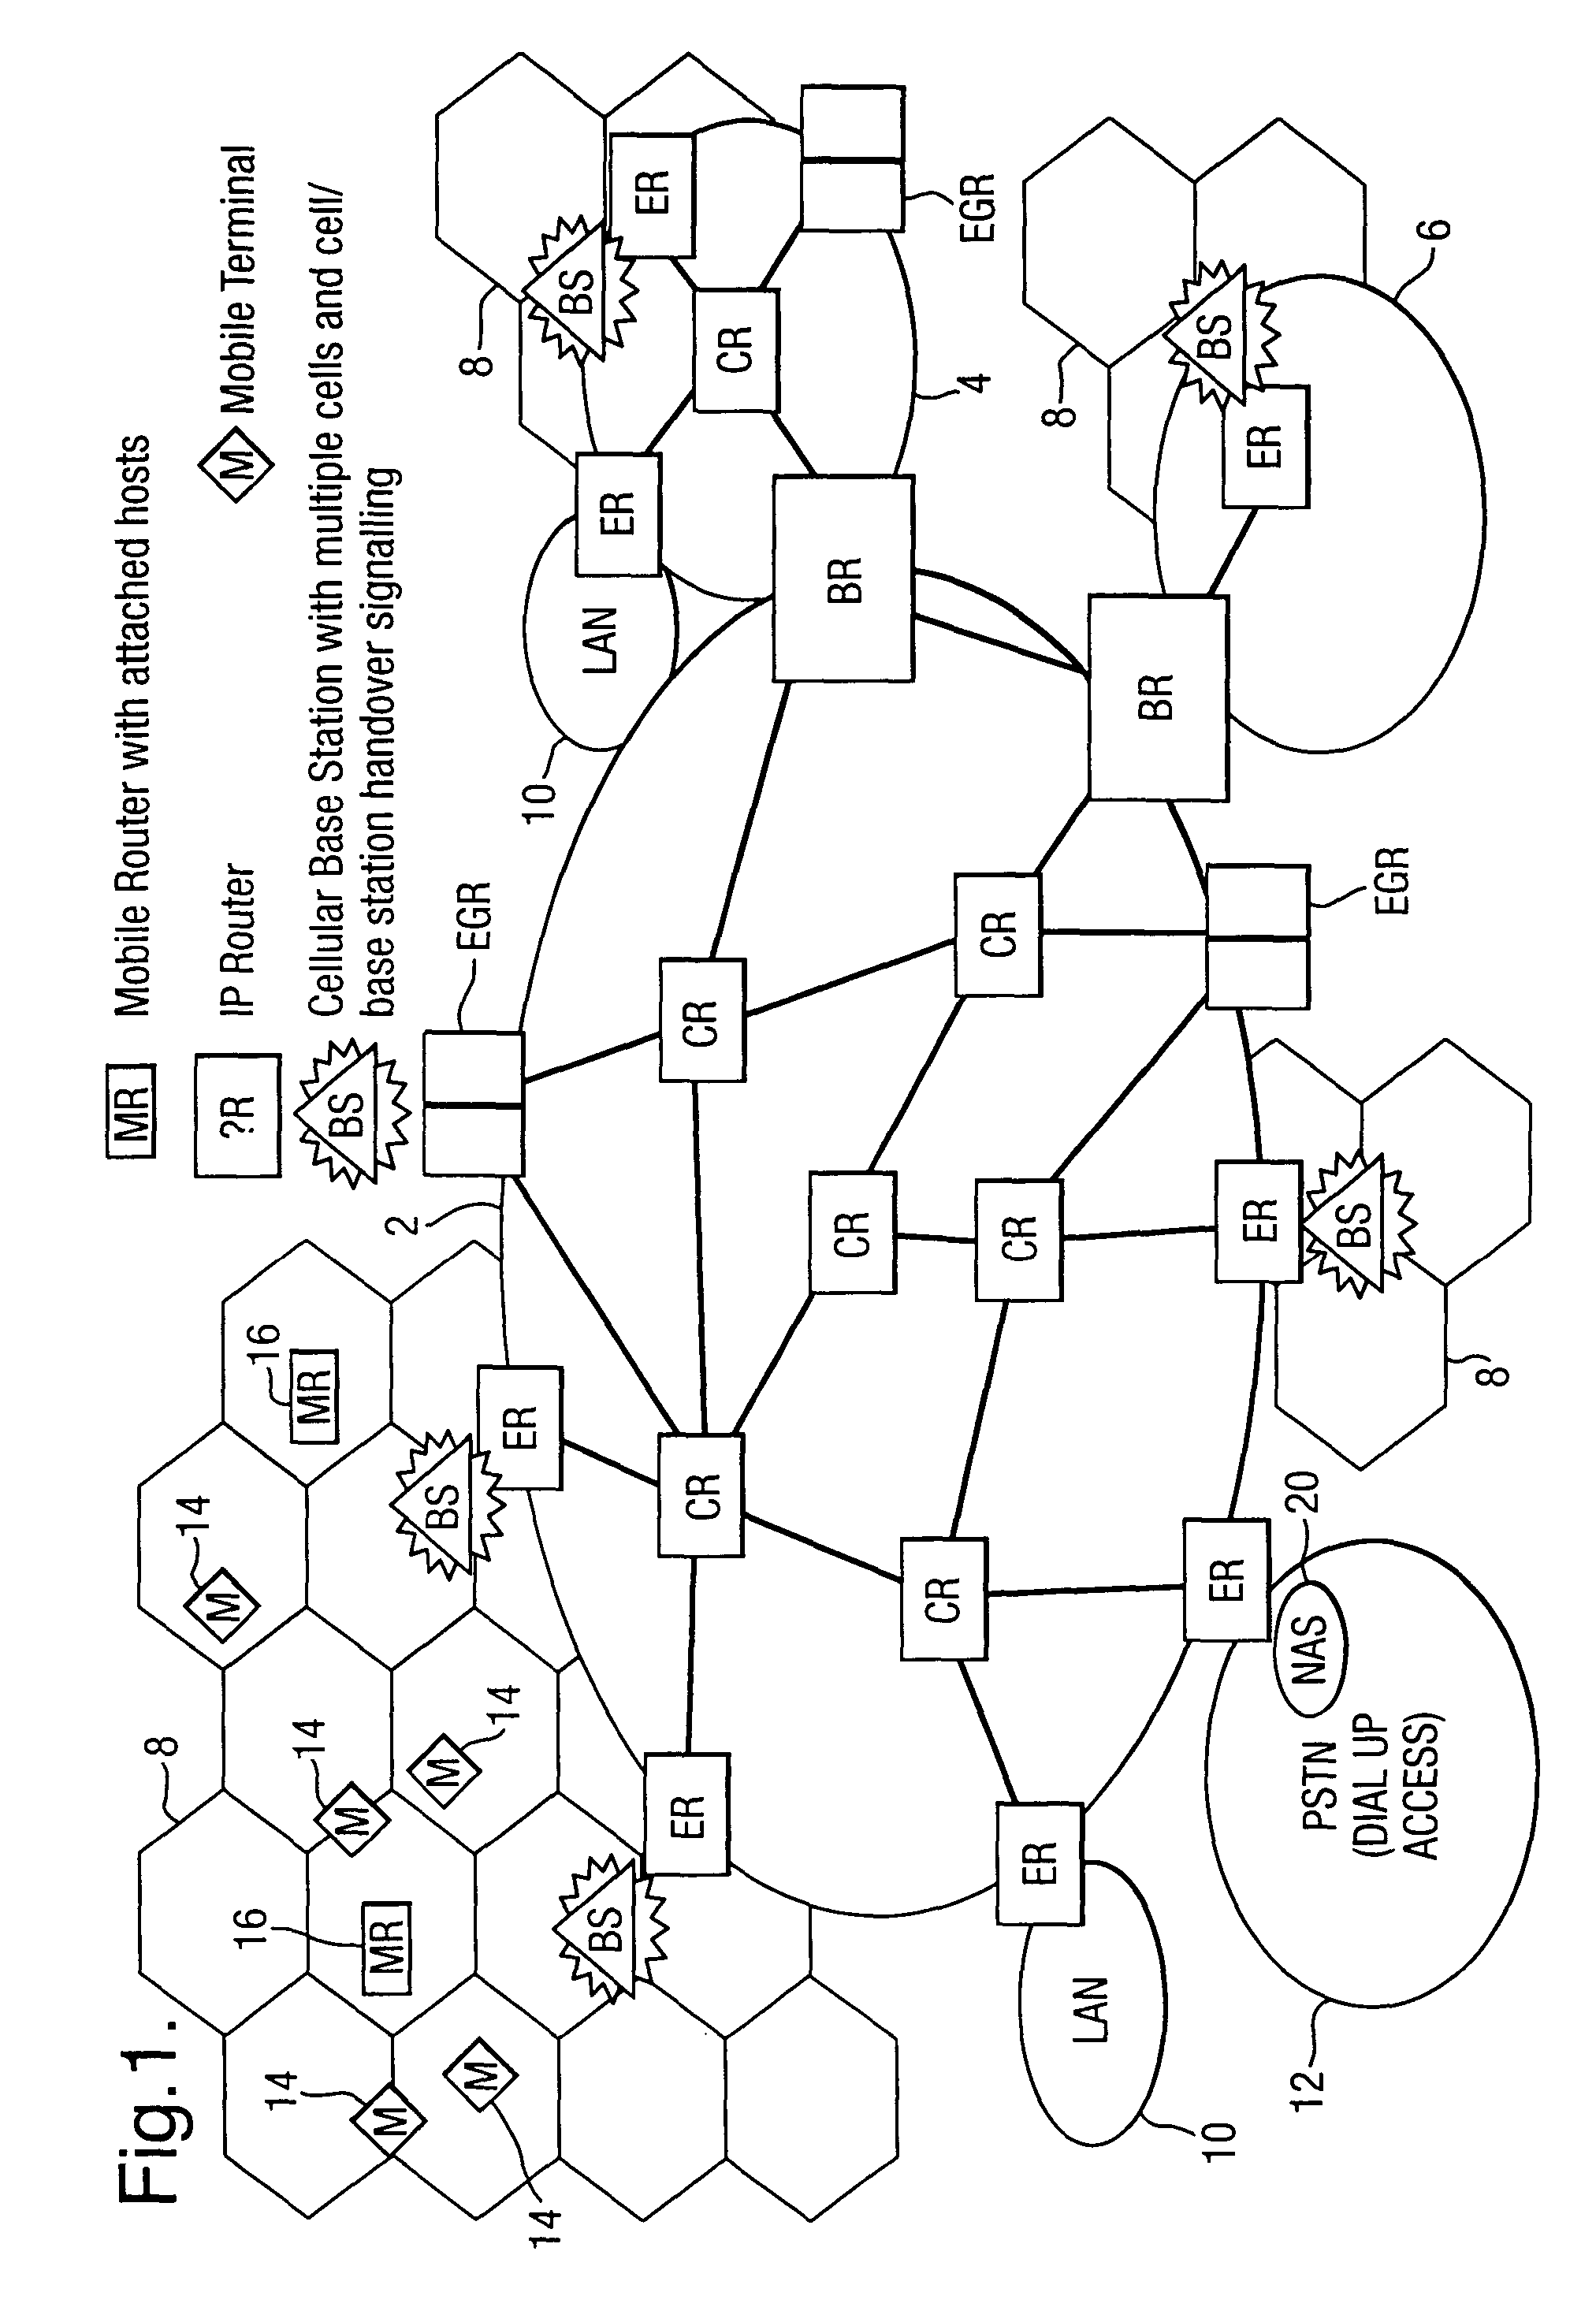 Telecommunication routing using multiple routing protocols in a single domain